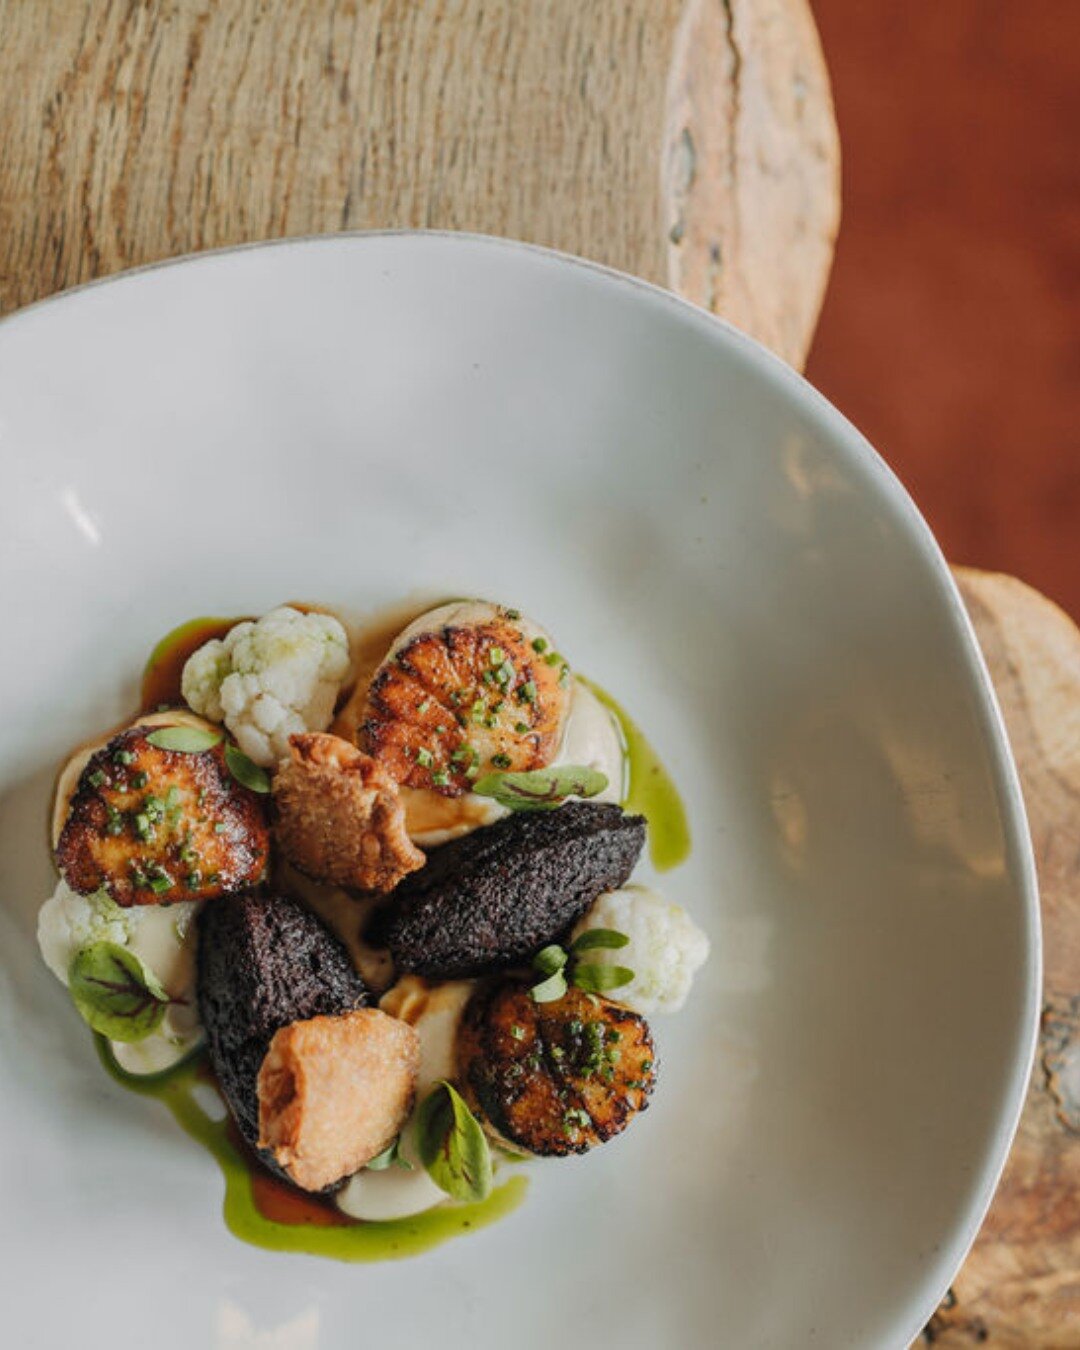 Our 3 AA rosette rating is an acknowledgement of our drive to consistently produce good-looking plates of food which are in harmony with the seasons using produce from local suppliers we are proud to call friends.

www.thewildebeest.co.uk